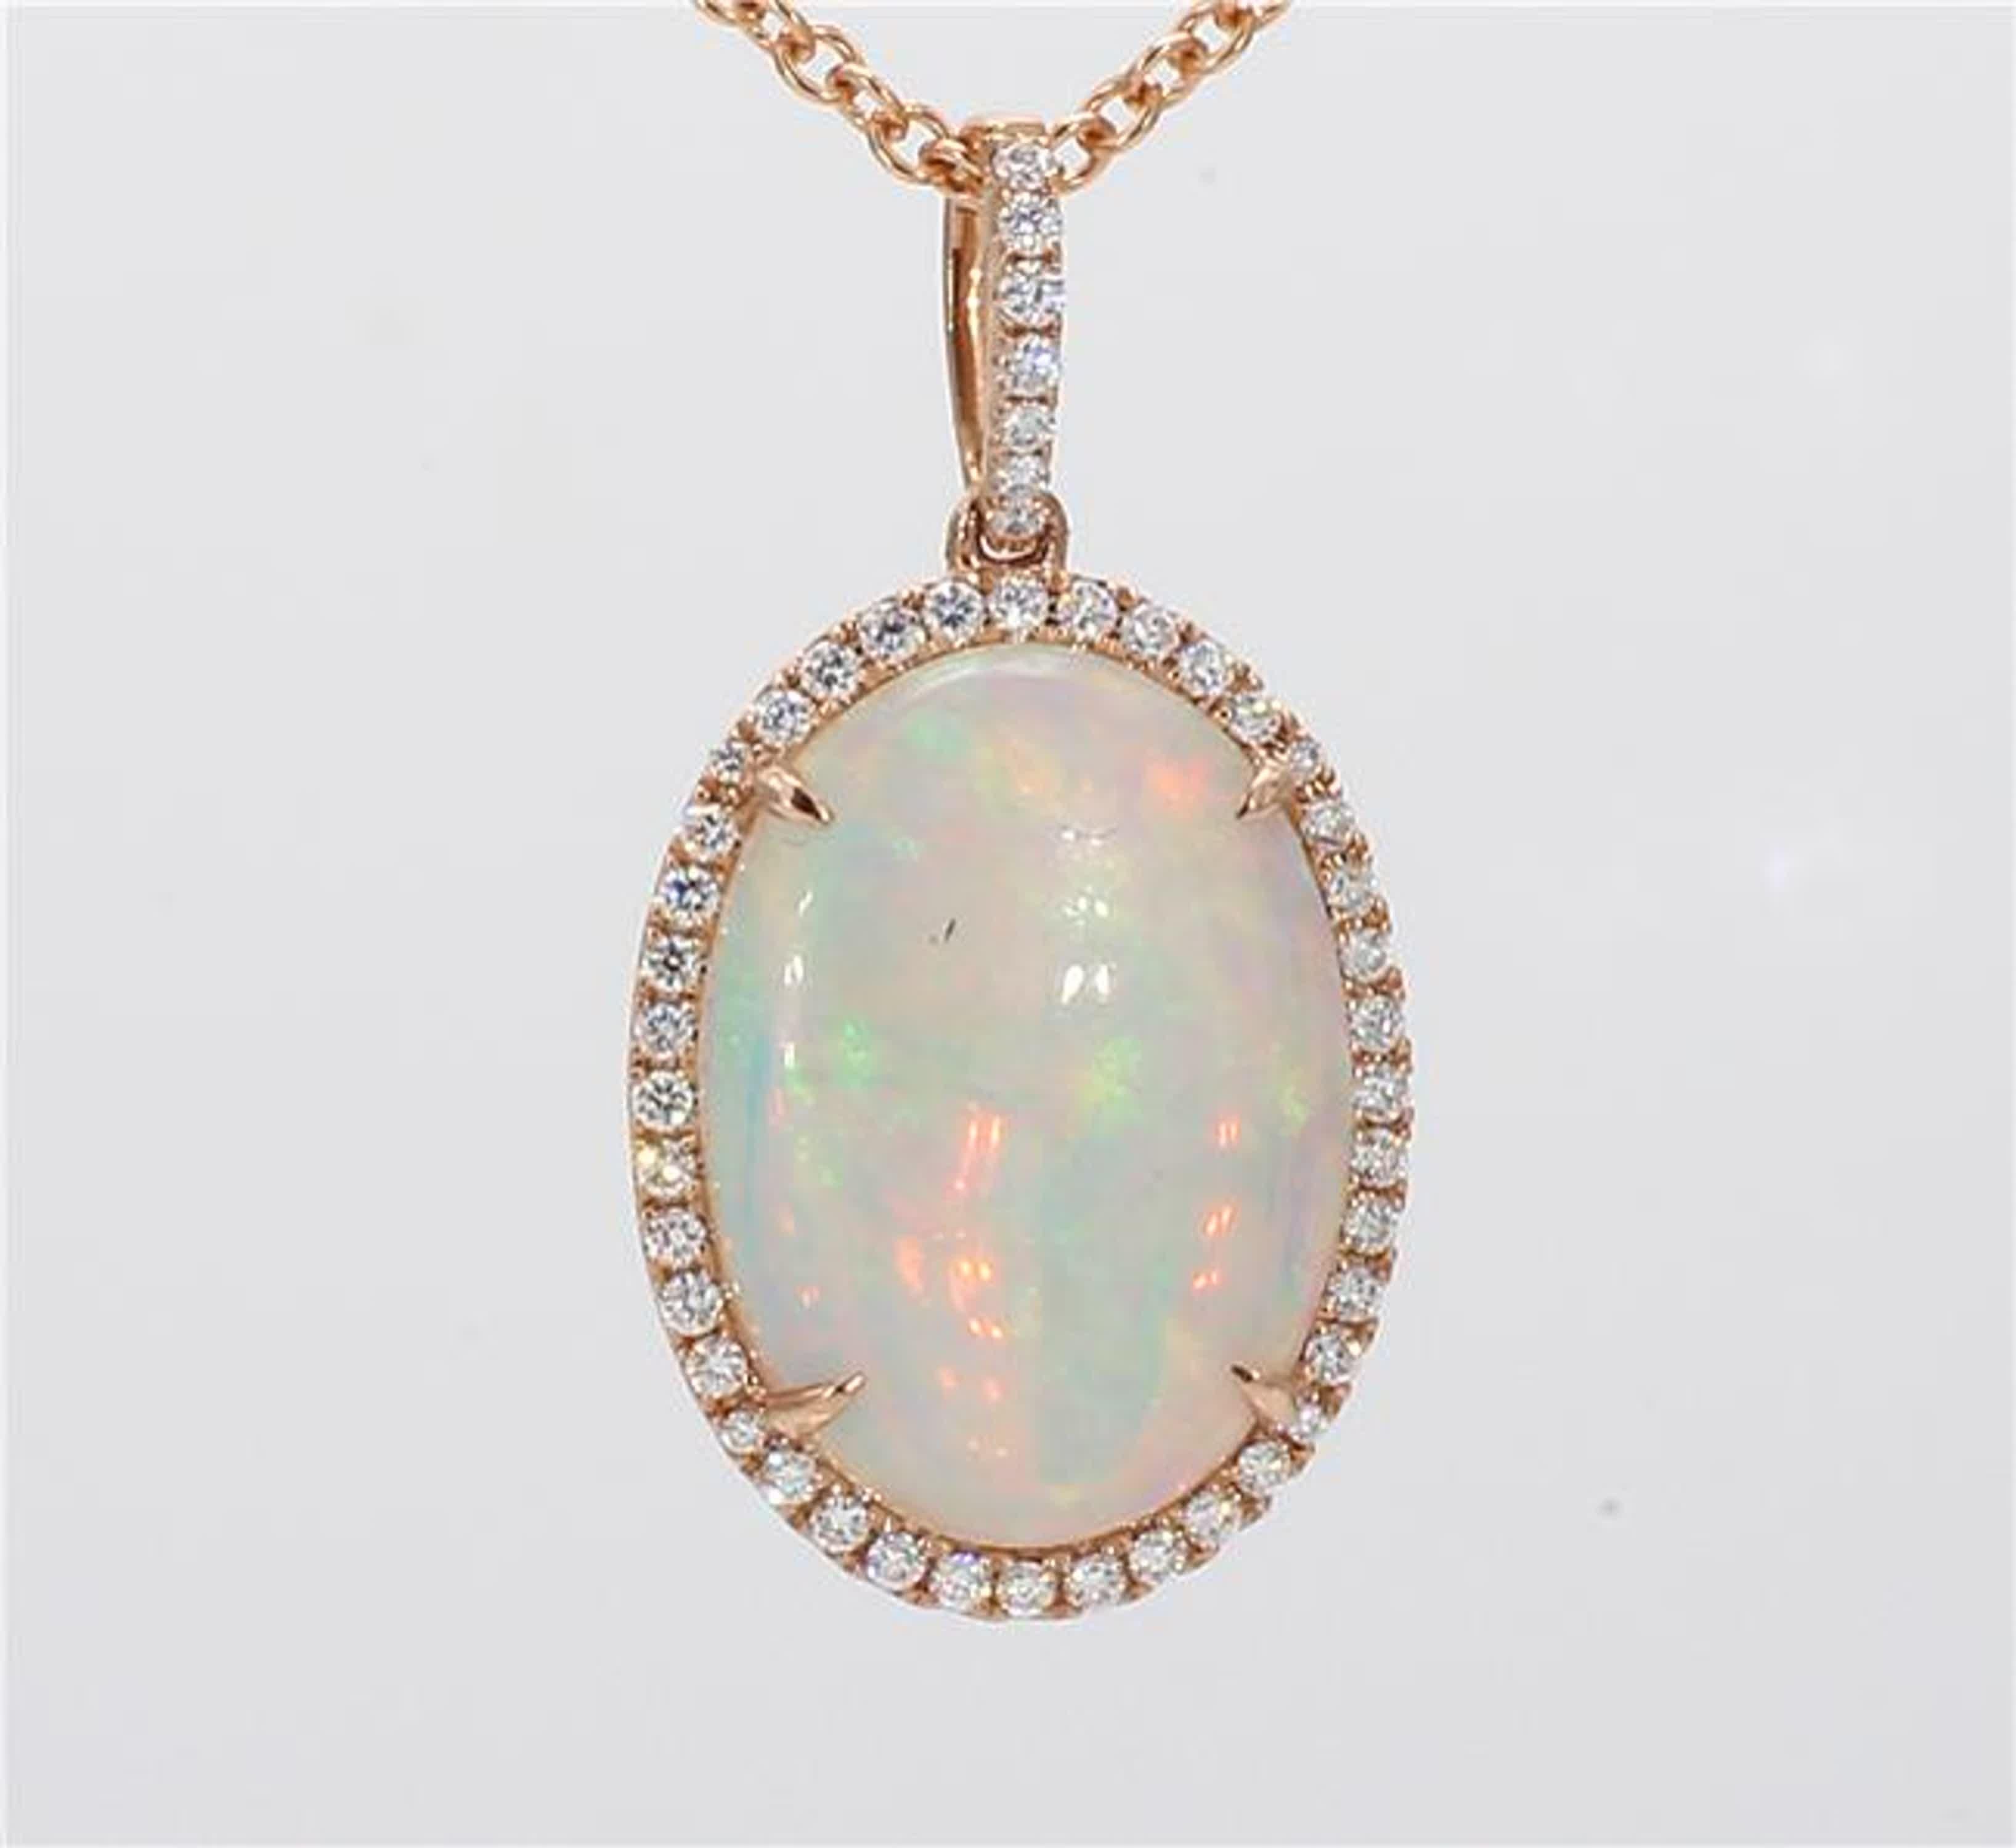 RareGemWorld's classic opal pendant. Mounted in a beautiful 14K Rose Gold setting with a natural oval cut opal. The opal is surrounded by natural round white diamond melee. This pendant is guaranteed to impress and enhance your personal